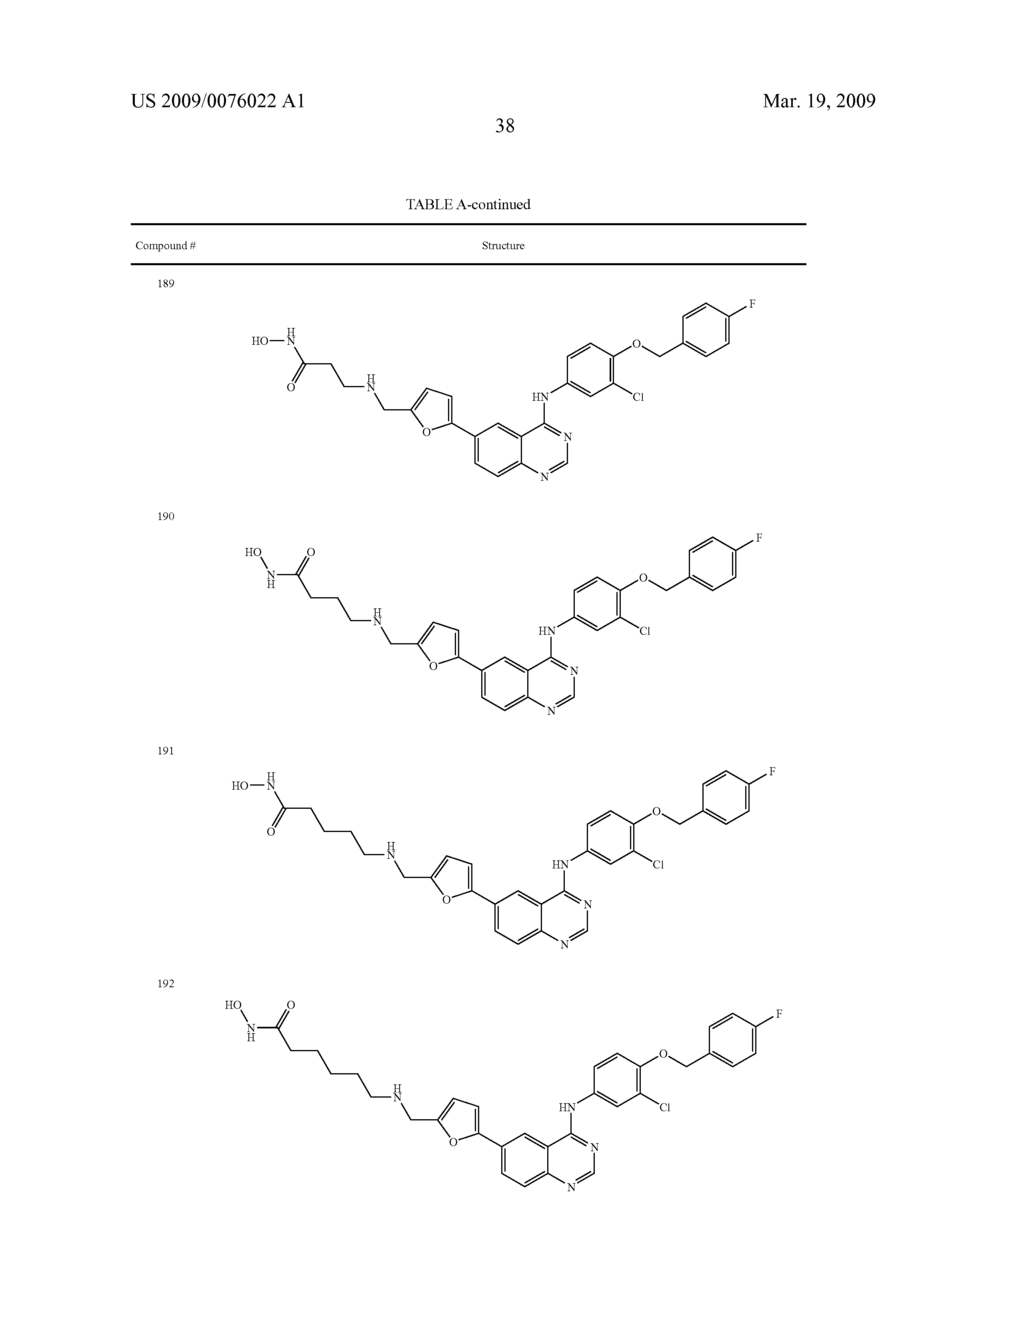 TARTRATE SALTS OF QUINAZOLINE BASED EGFR INHIBITORS CONTAINING A ZINC BINDING MOIETY - diagram, schematic, and image 59